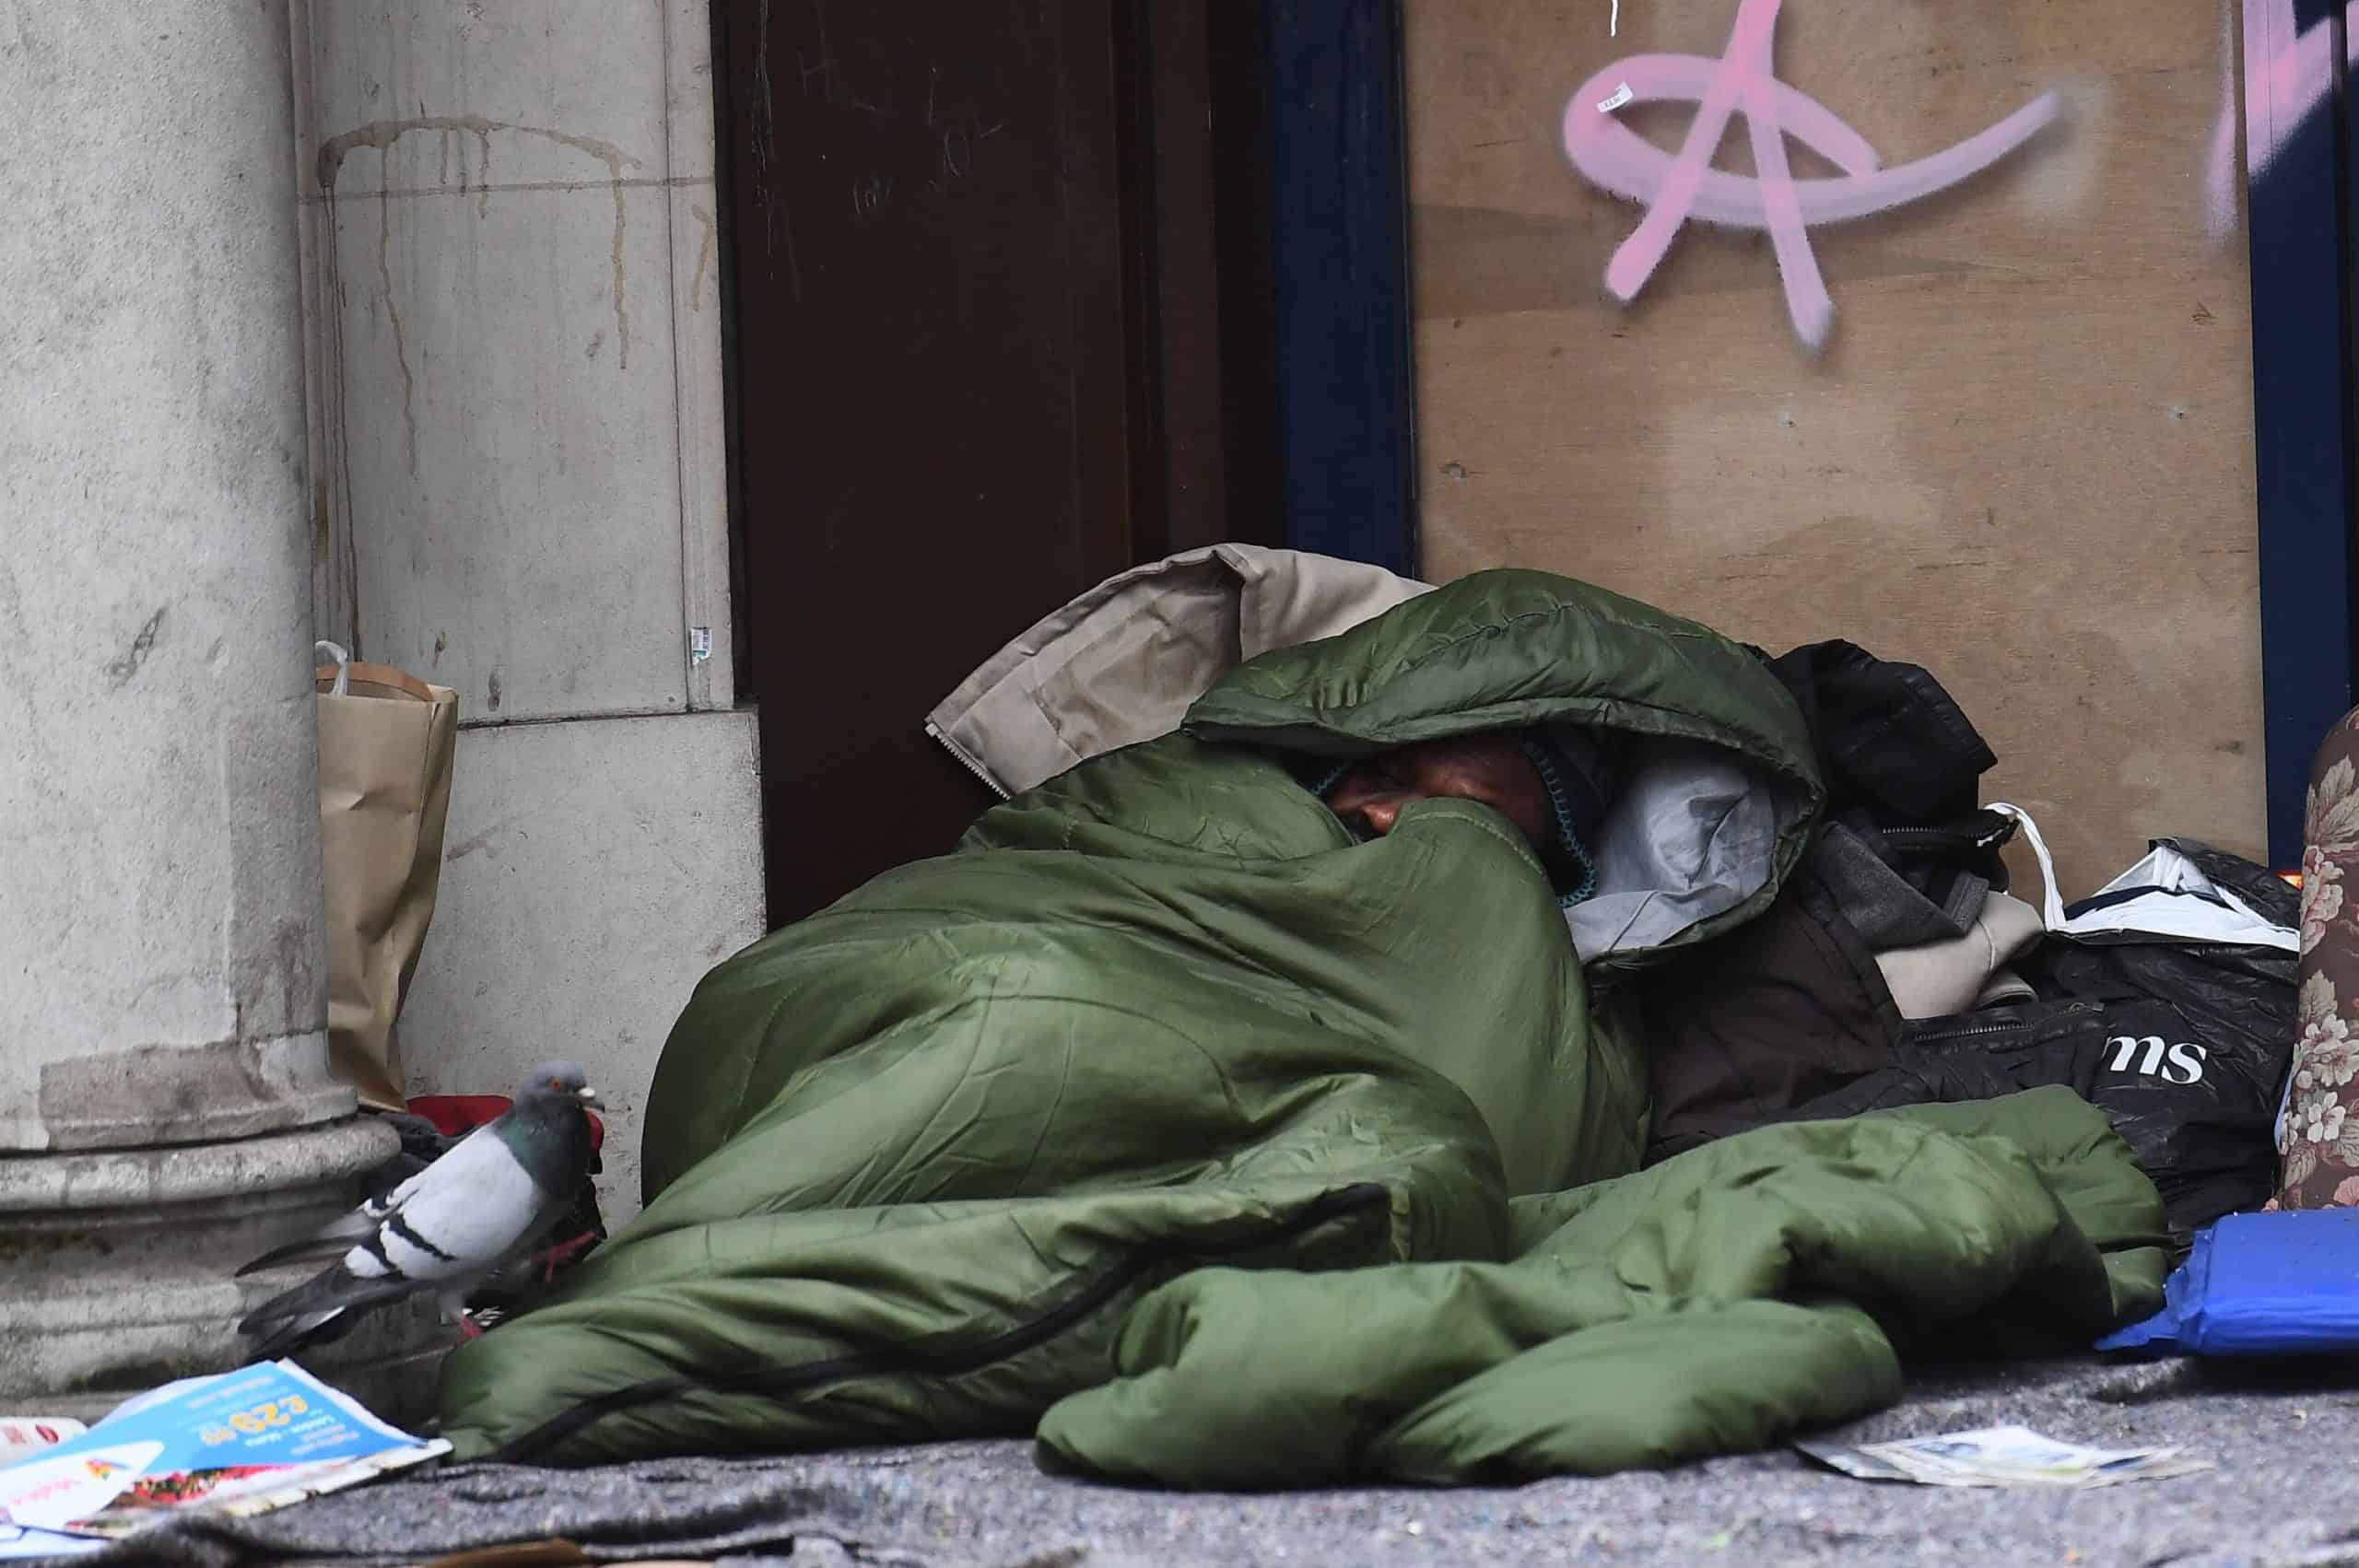 200,000 children could be made homeless this winter, charity warns